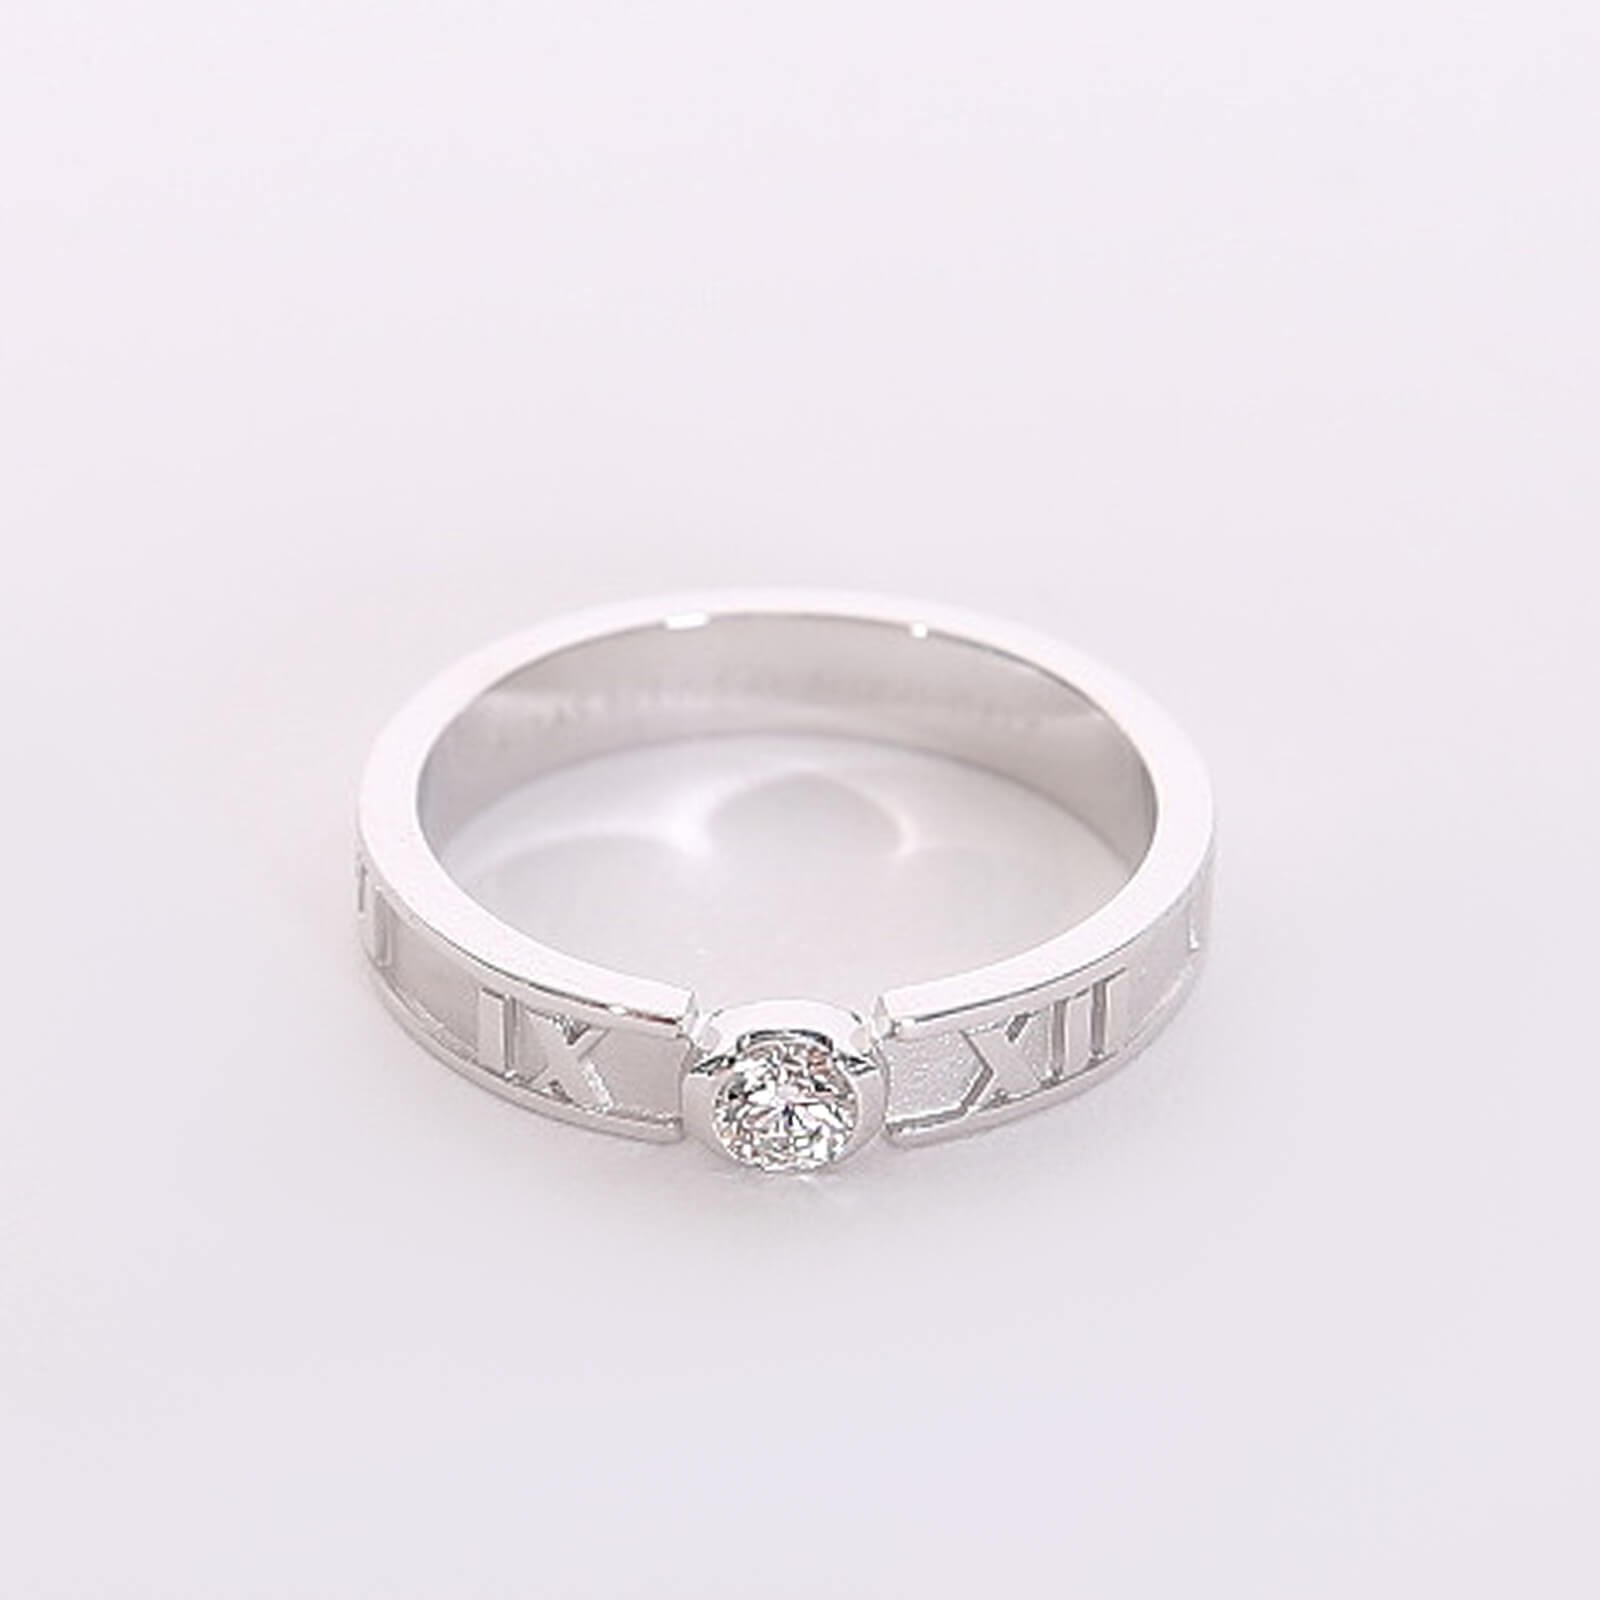 Atlas® X Closed Narrow Ring in White Gold with Diamonds, 4.5 mm Wide |  Tiffany & Co.